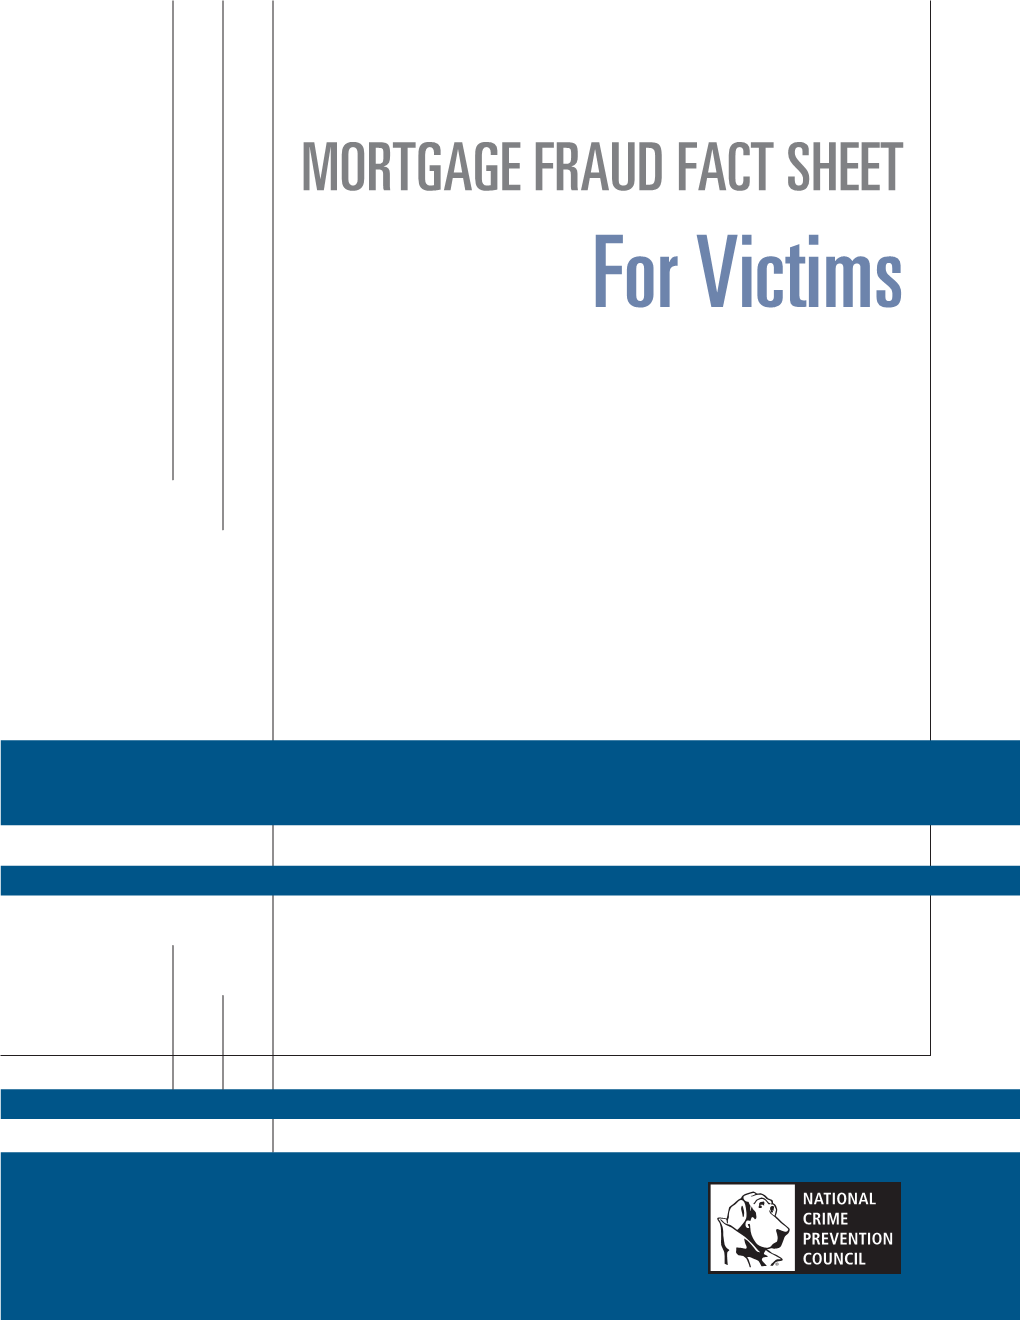 MORTGAGE FRAUD FACT SHEET for Victims